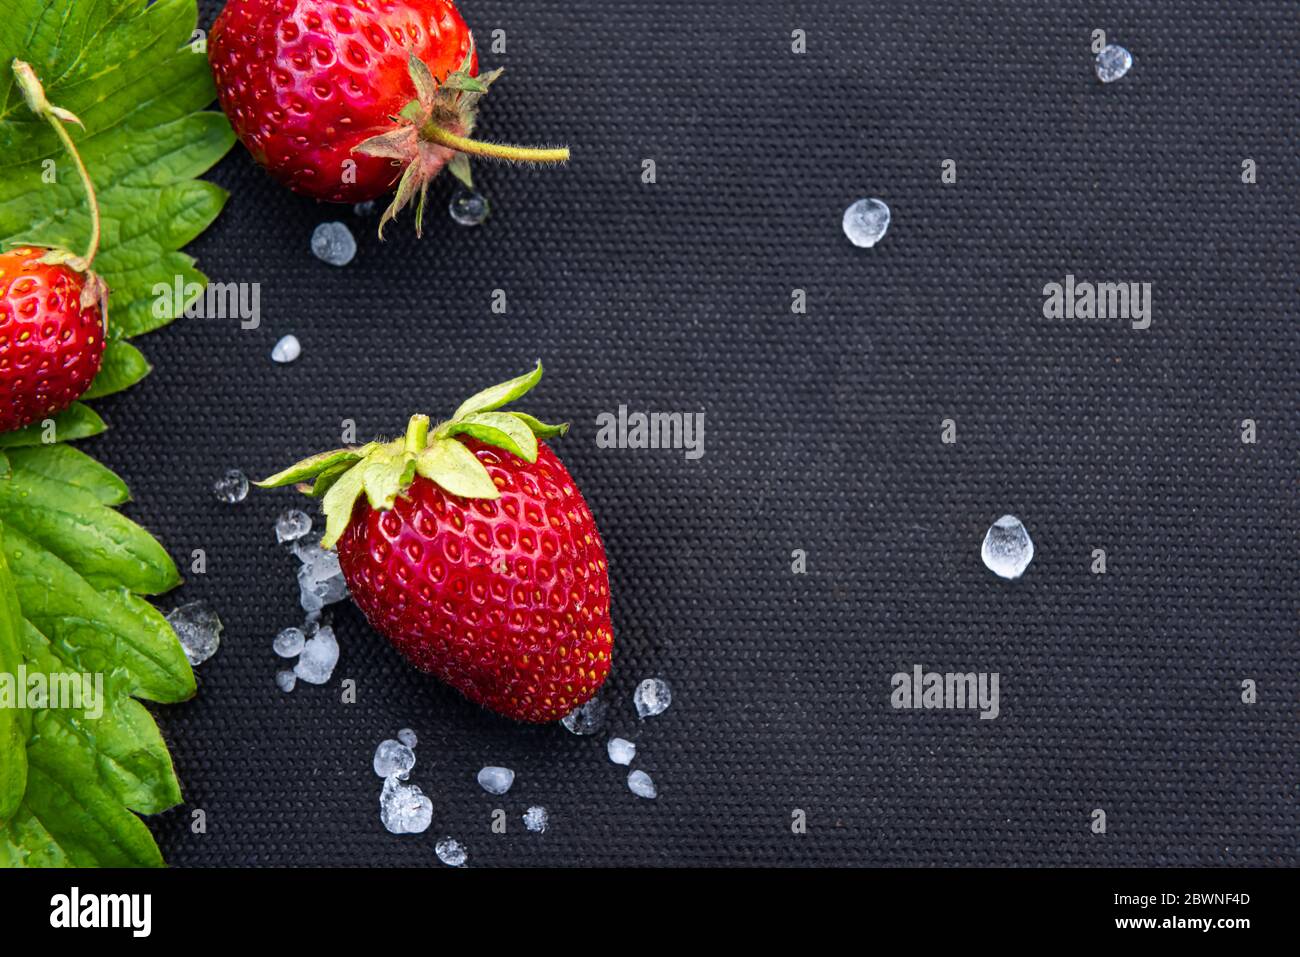 Red strawberries with few white hailstones and strawberry leaf on black textile material used for cultivating this berry in garden. Horizontal backgro Stock Photo